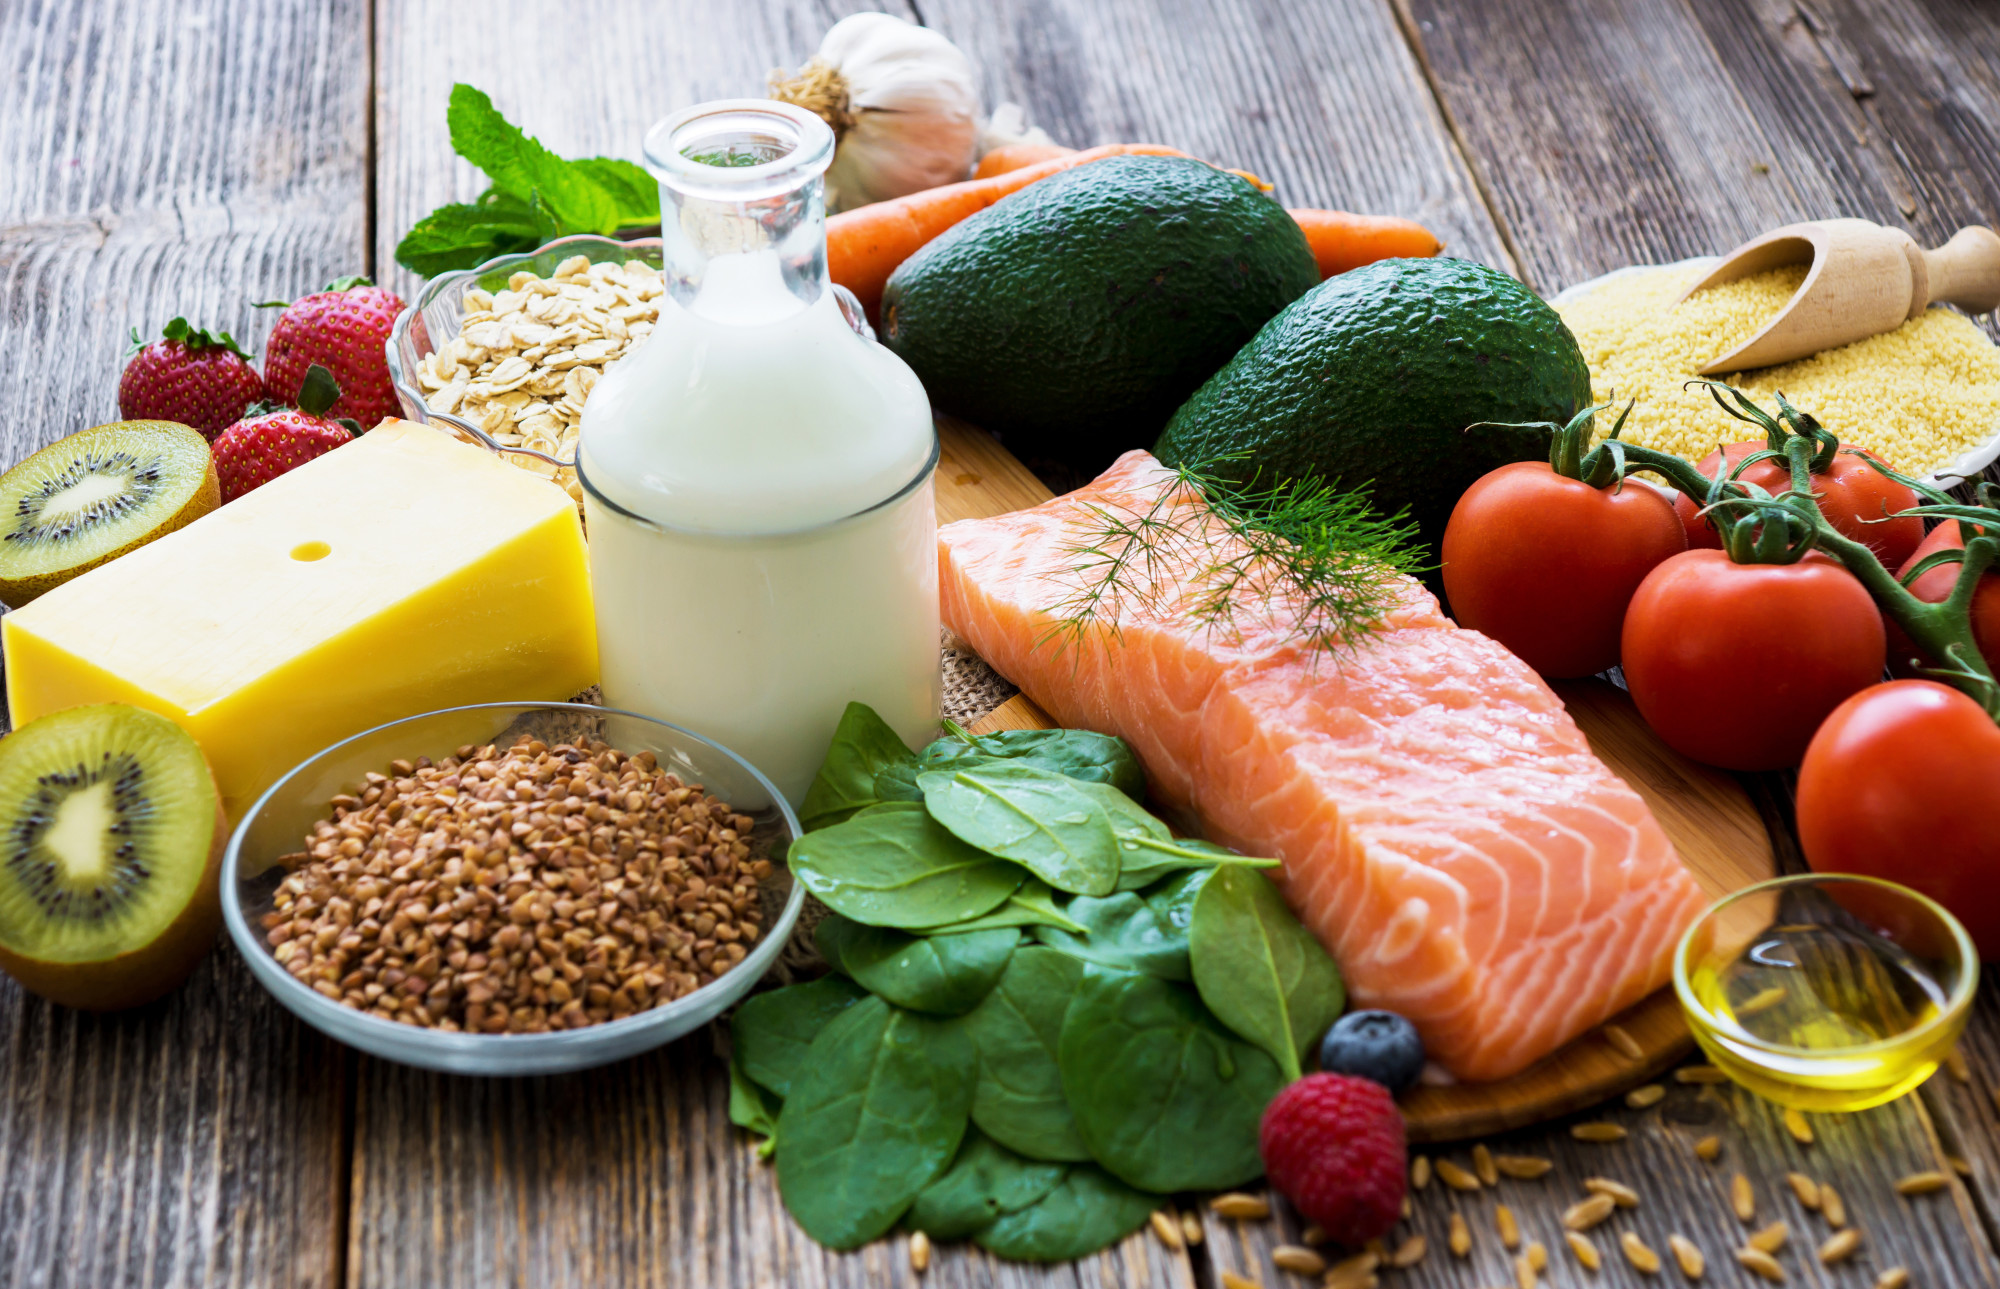 A photo of healthy foods including vegetables, fruits, milk, and salmon